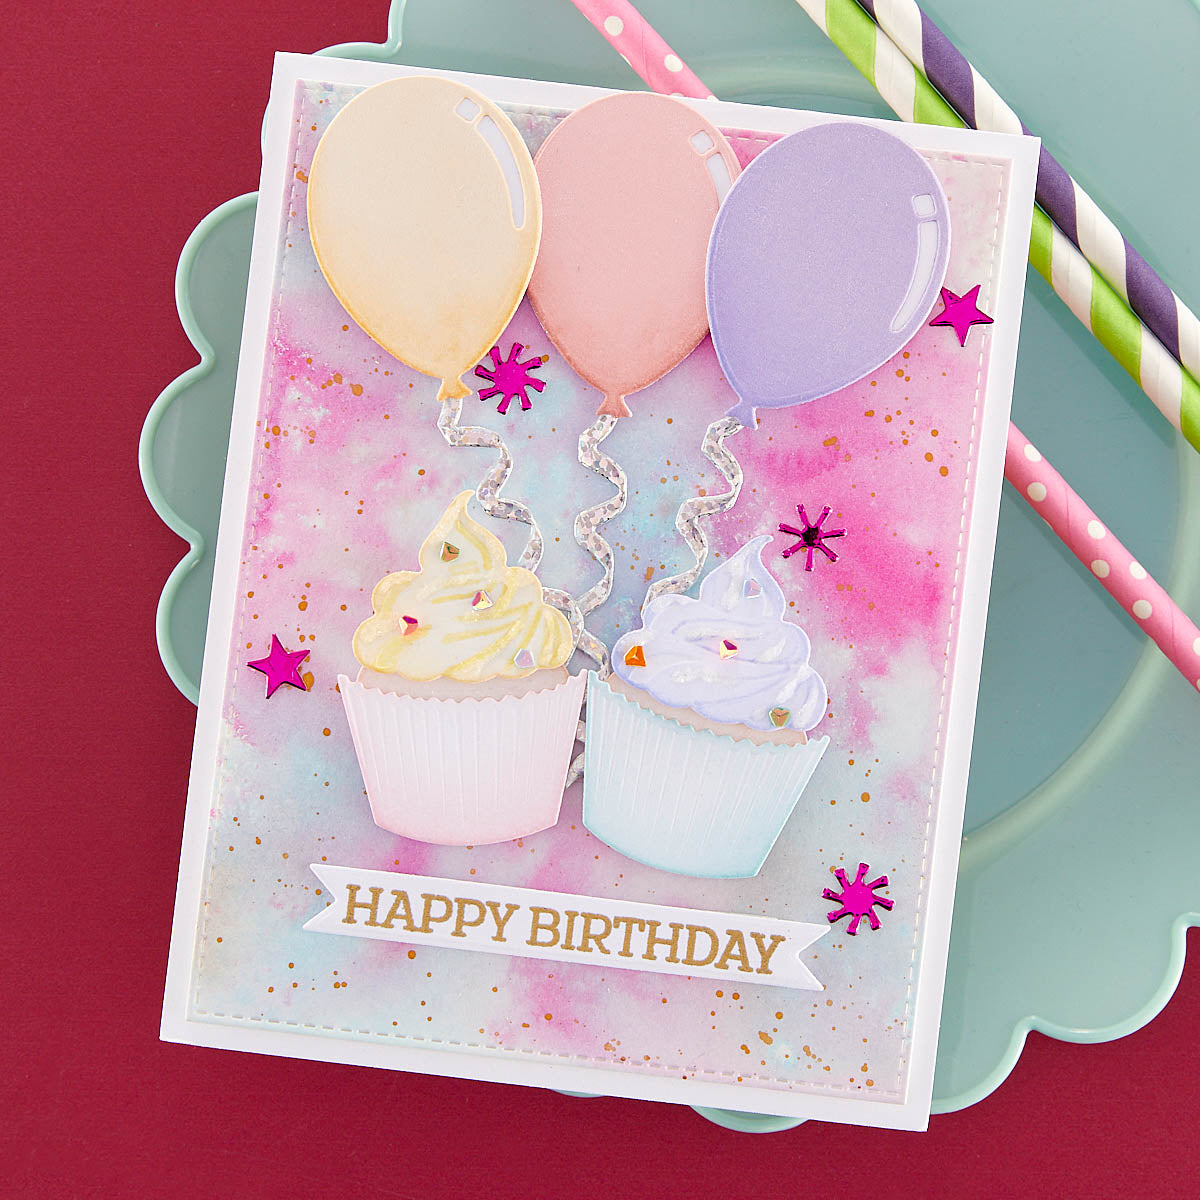 Spellbinders - Birthday Wreath Add-Ons Etched Dies from the Beautiful Wreaths Collection by Suzanne Hue